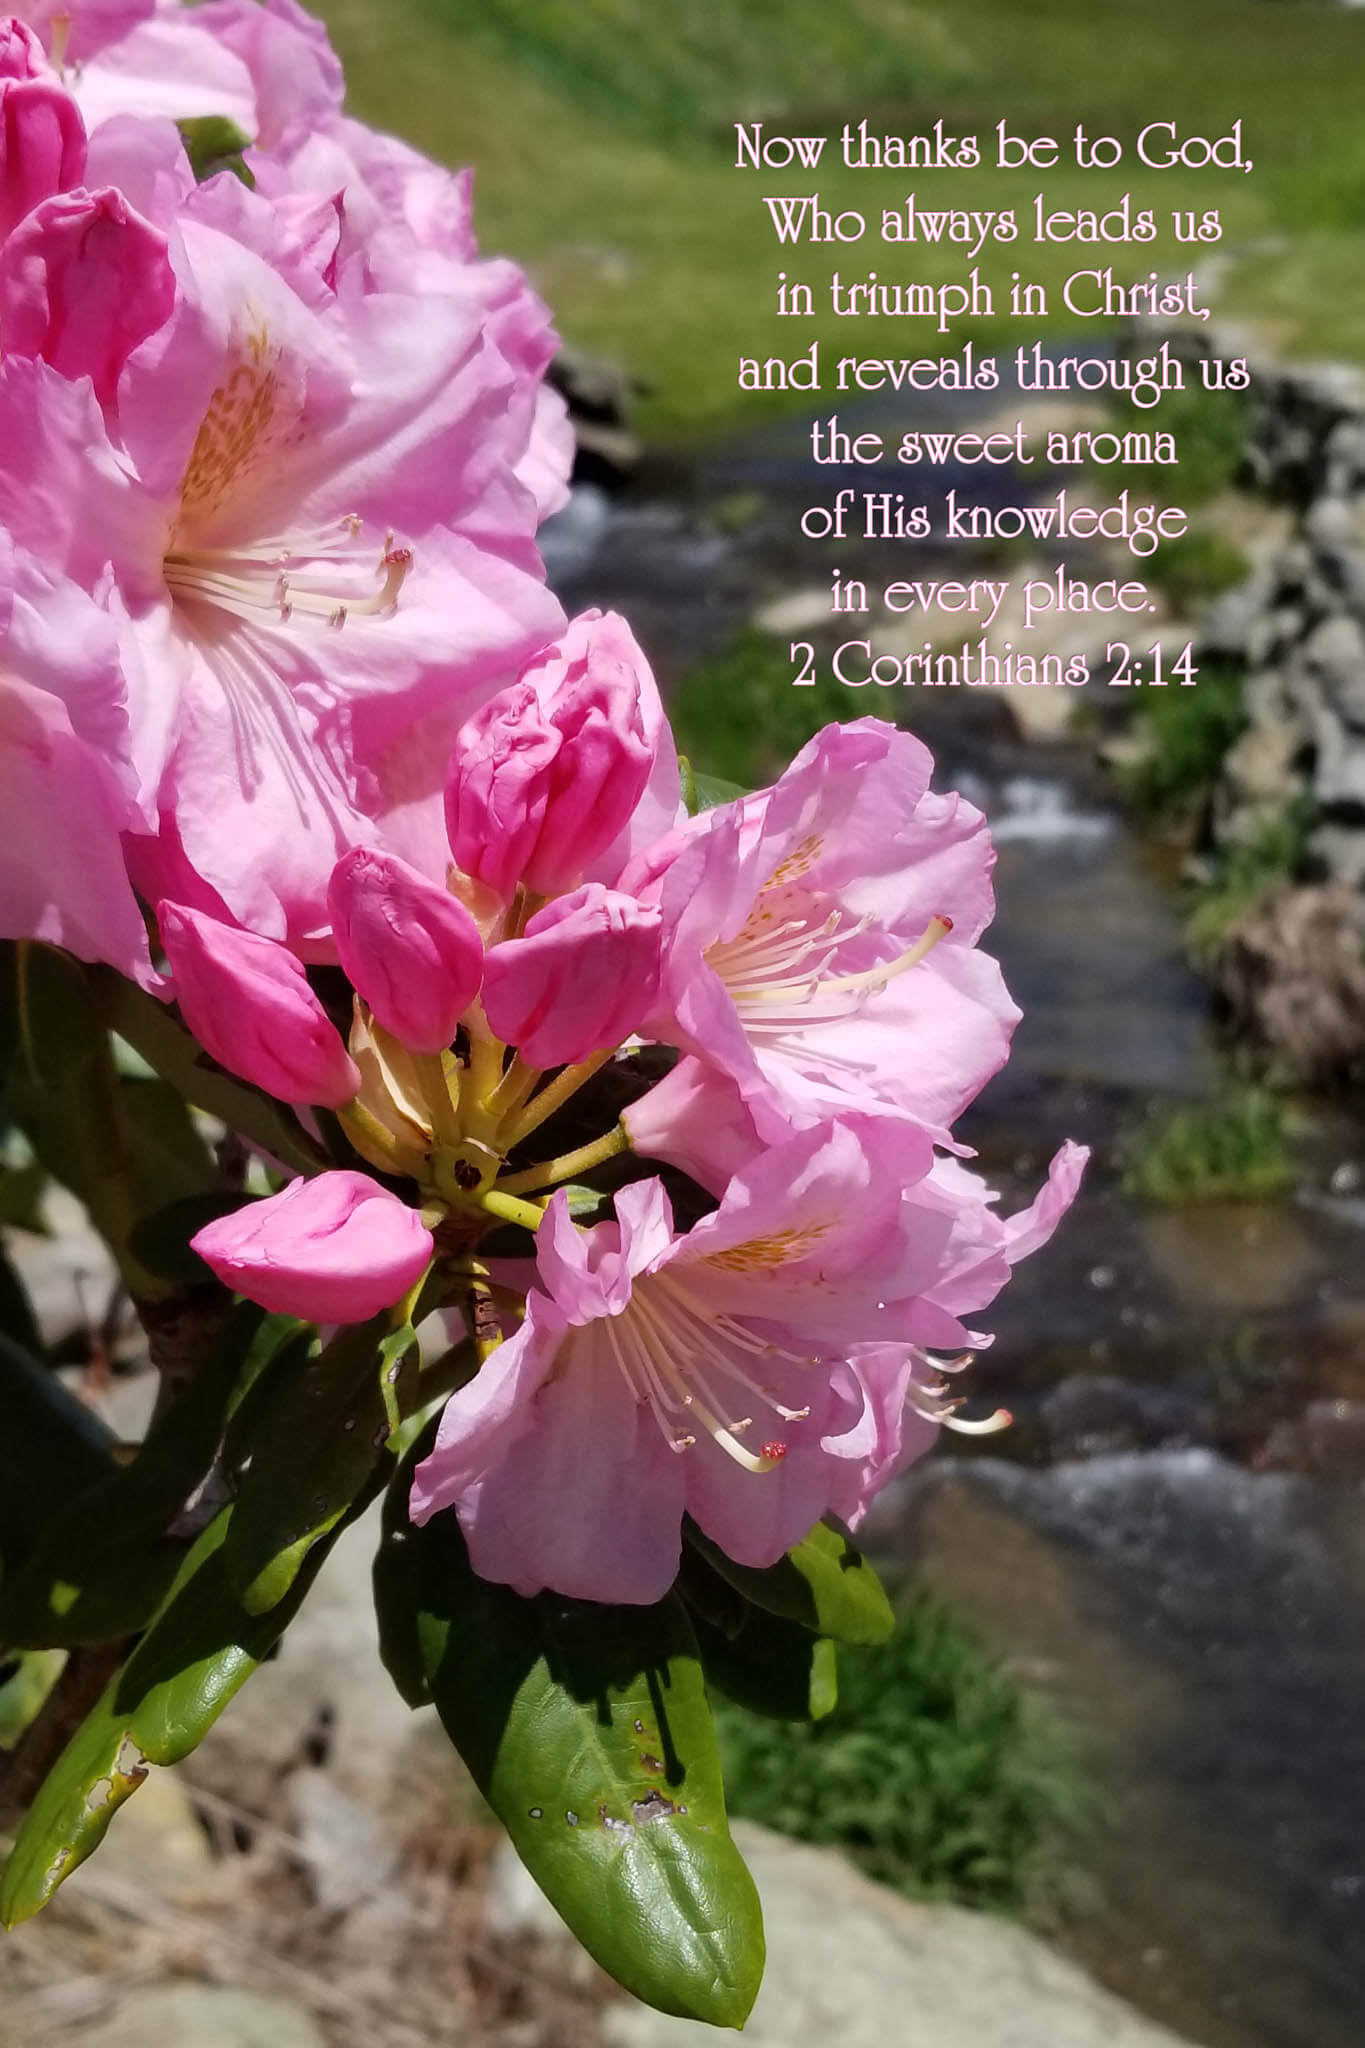 2 Corinthians 2:14 Rhododendron Blossoms